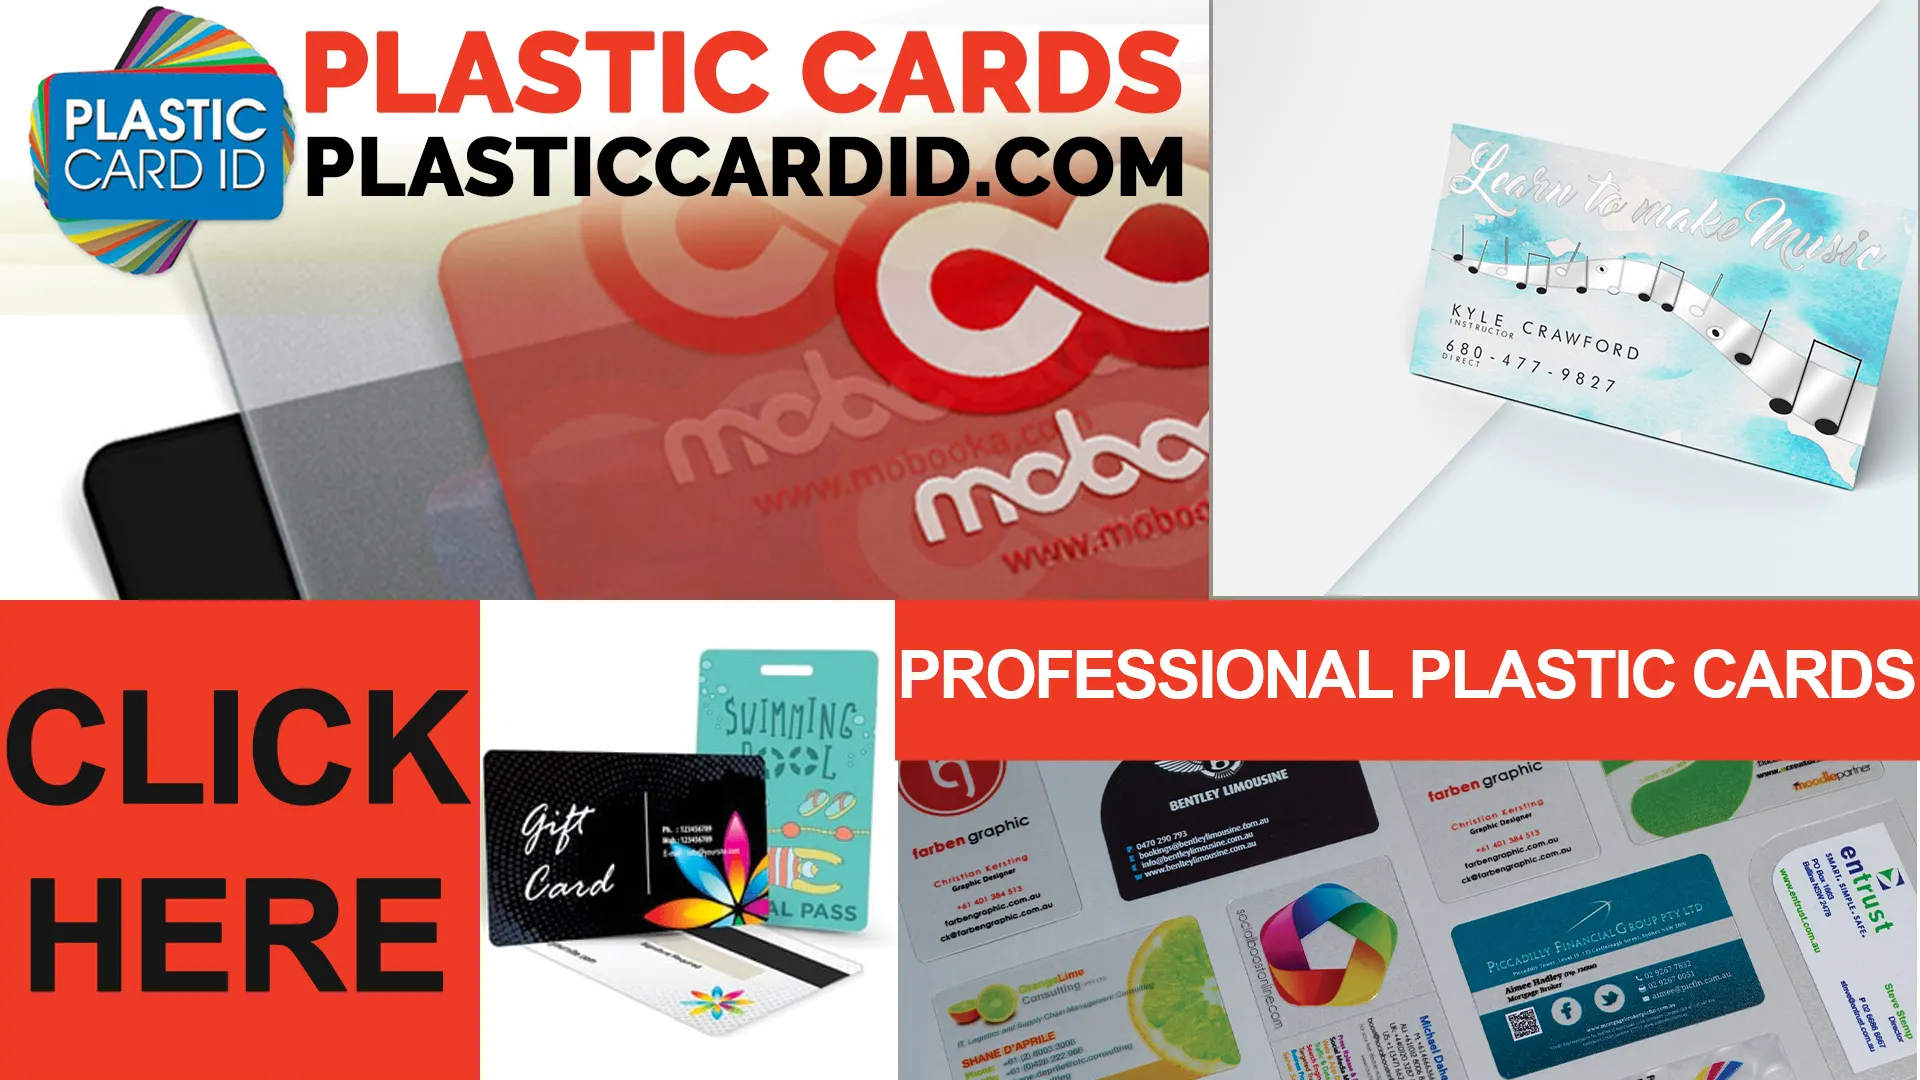 Expert Financial Guidance for Your Plastic Card Project